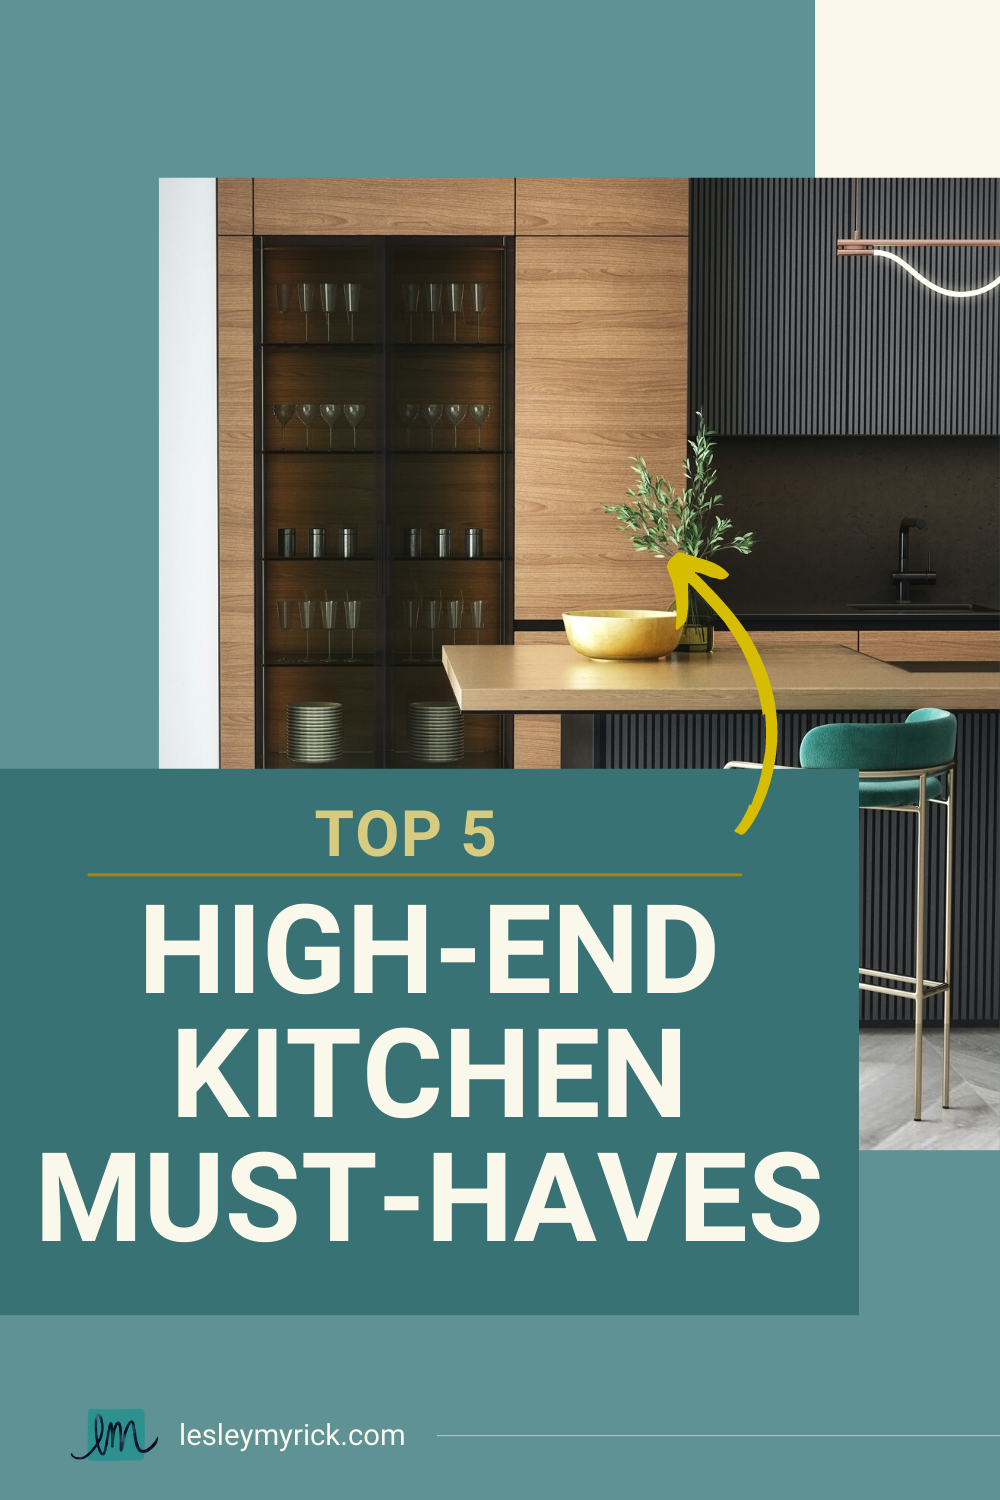 Top 5 high-end kitchen must-haves from interior designer Lesley Myrick. Lesley Myrick serves clients locally in the Atlanta Georgia area, as well as virtually throughout the United States and Canada.